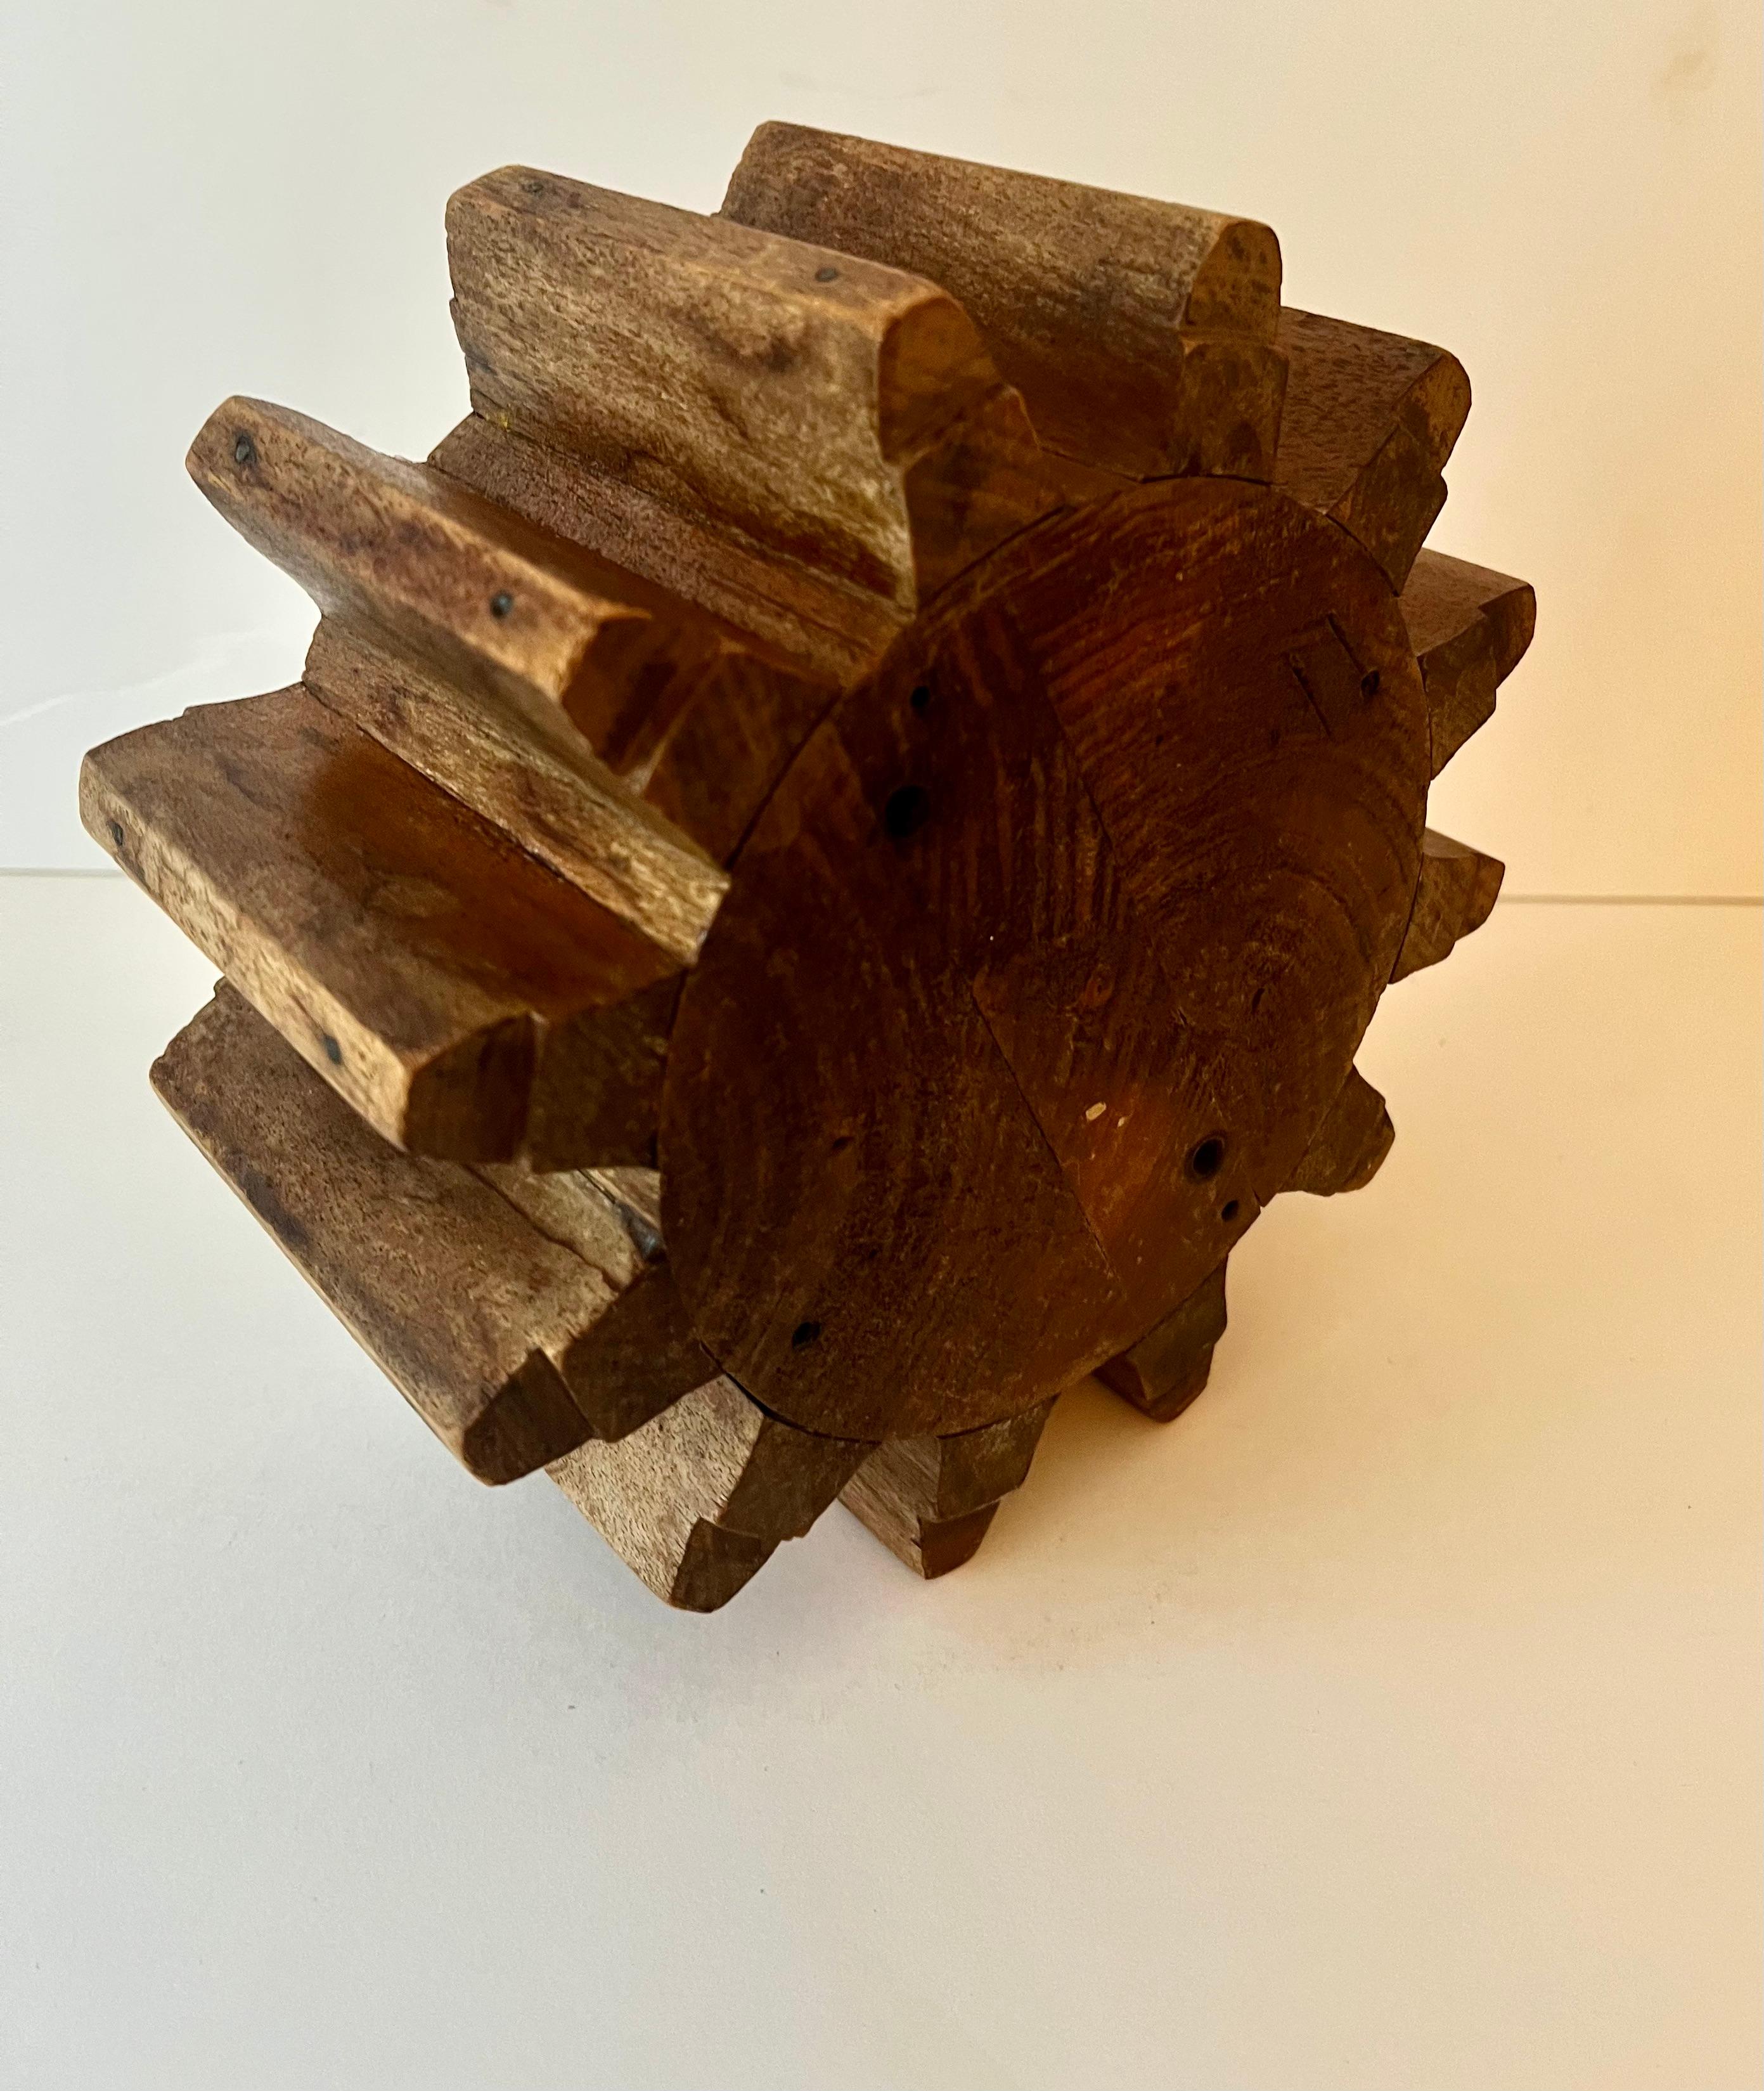 Rustic Wooden Cog or Gear Part For Sale